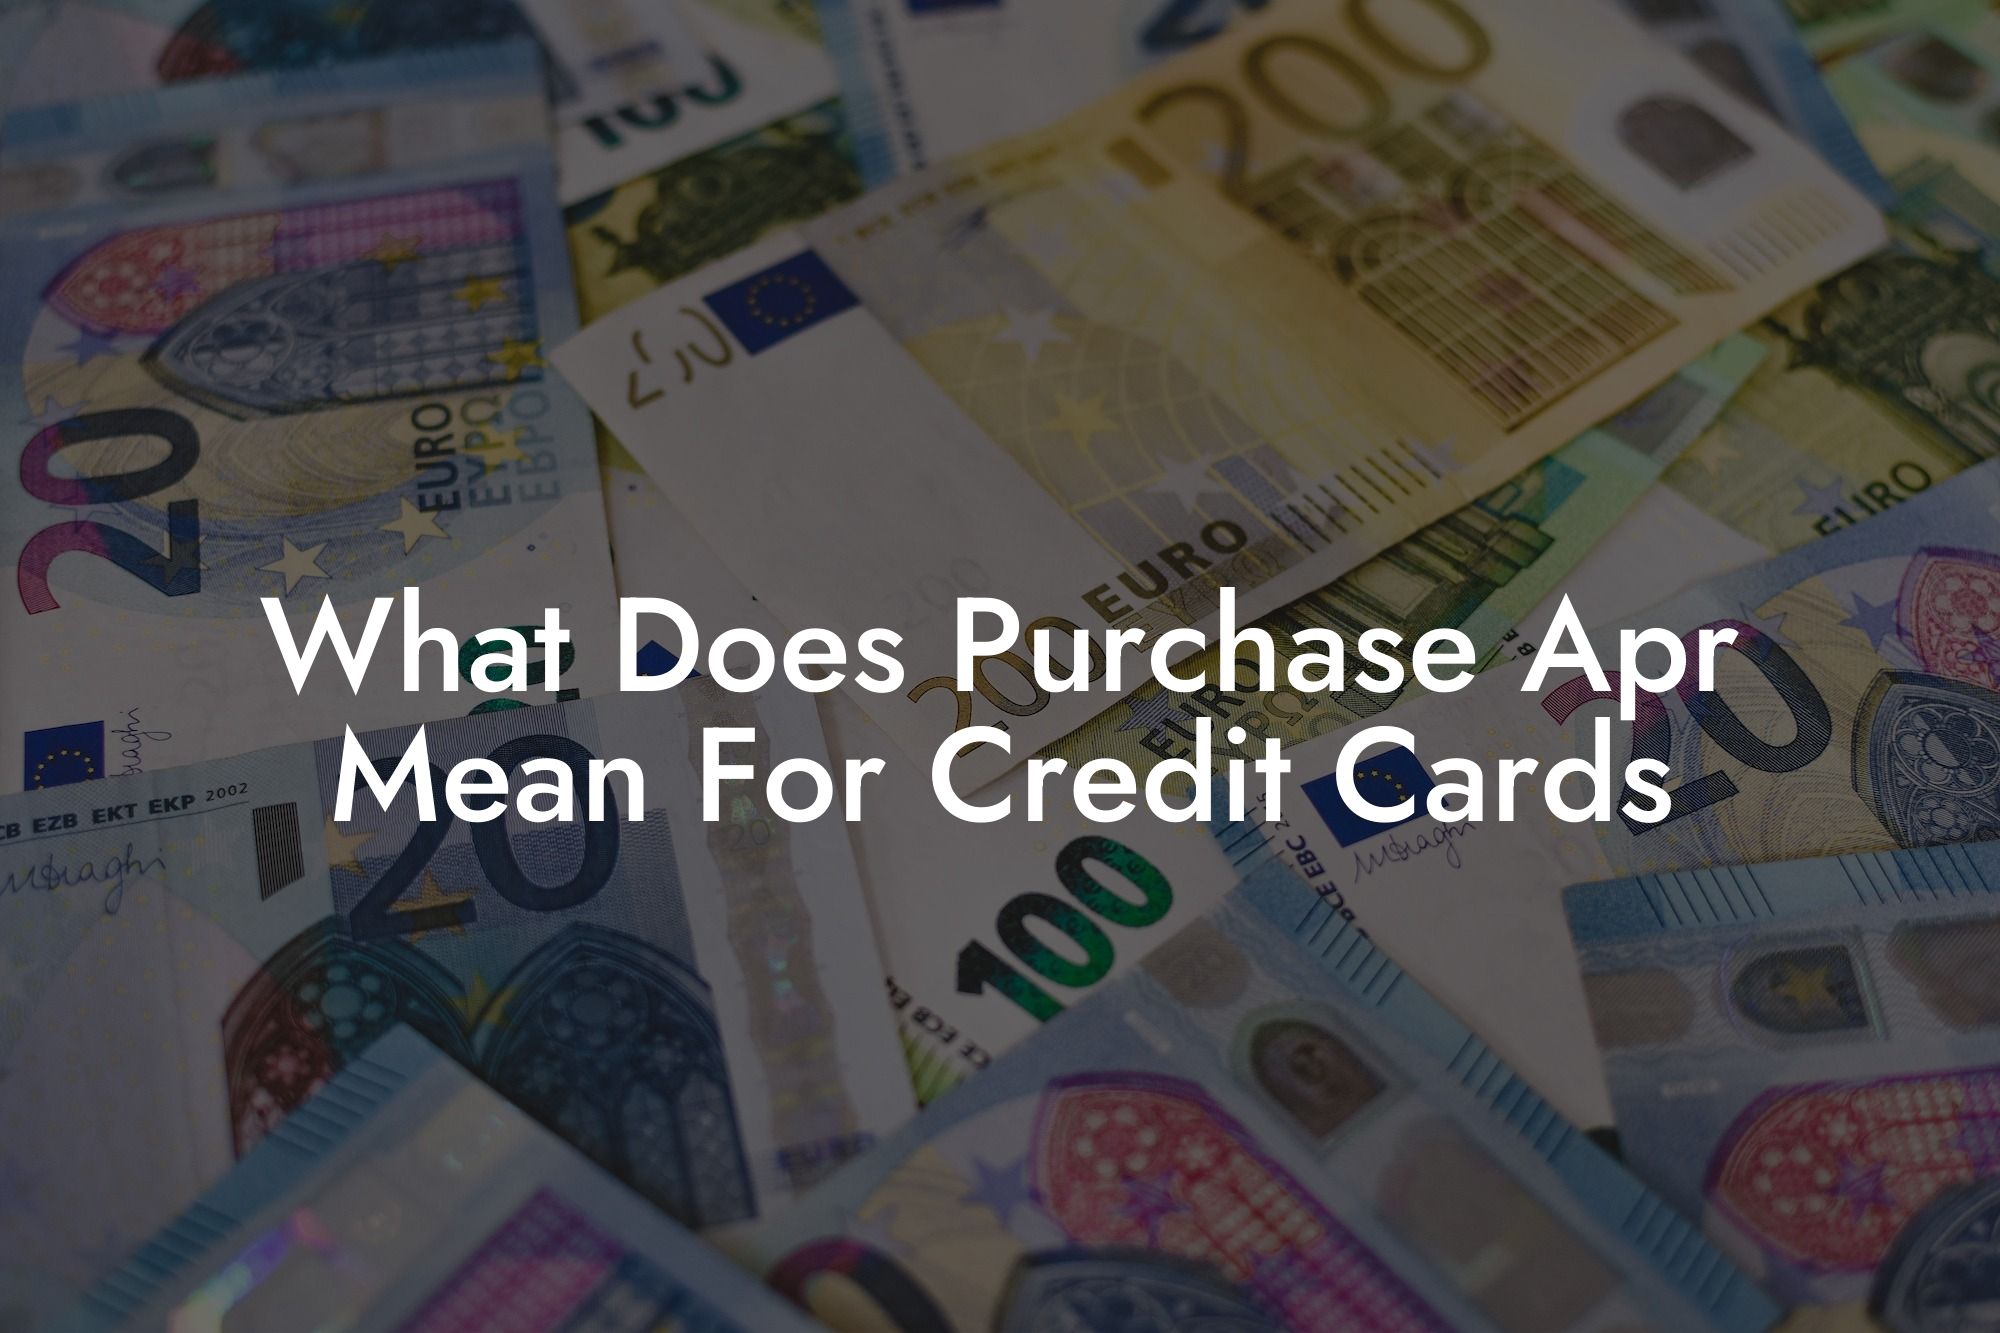 What Does Purchase Apr Mean For Credit Cards